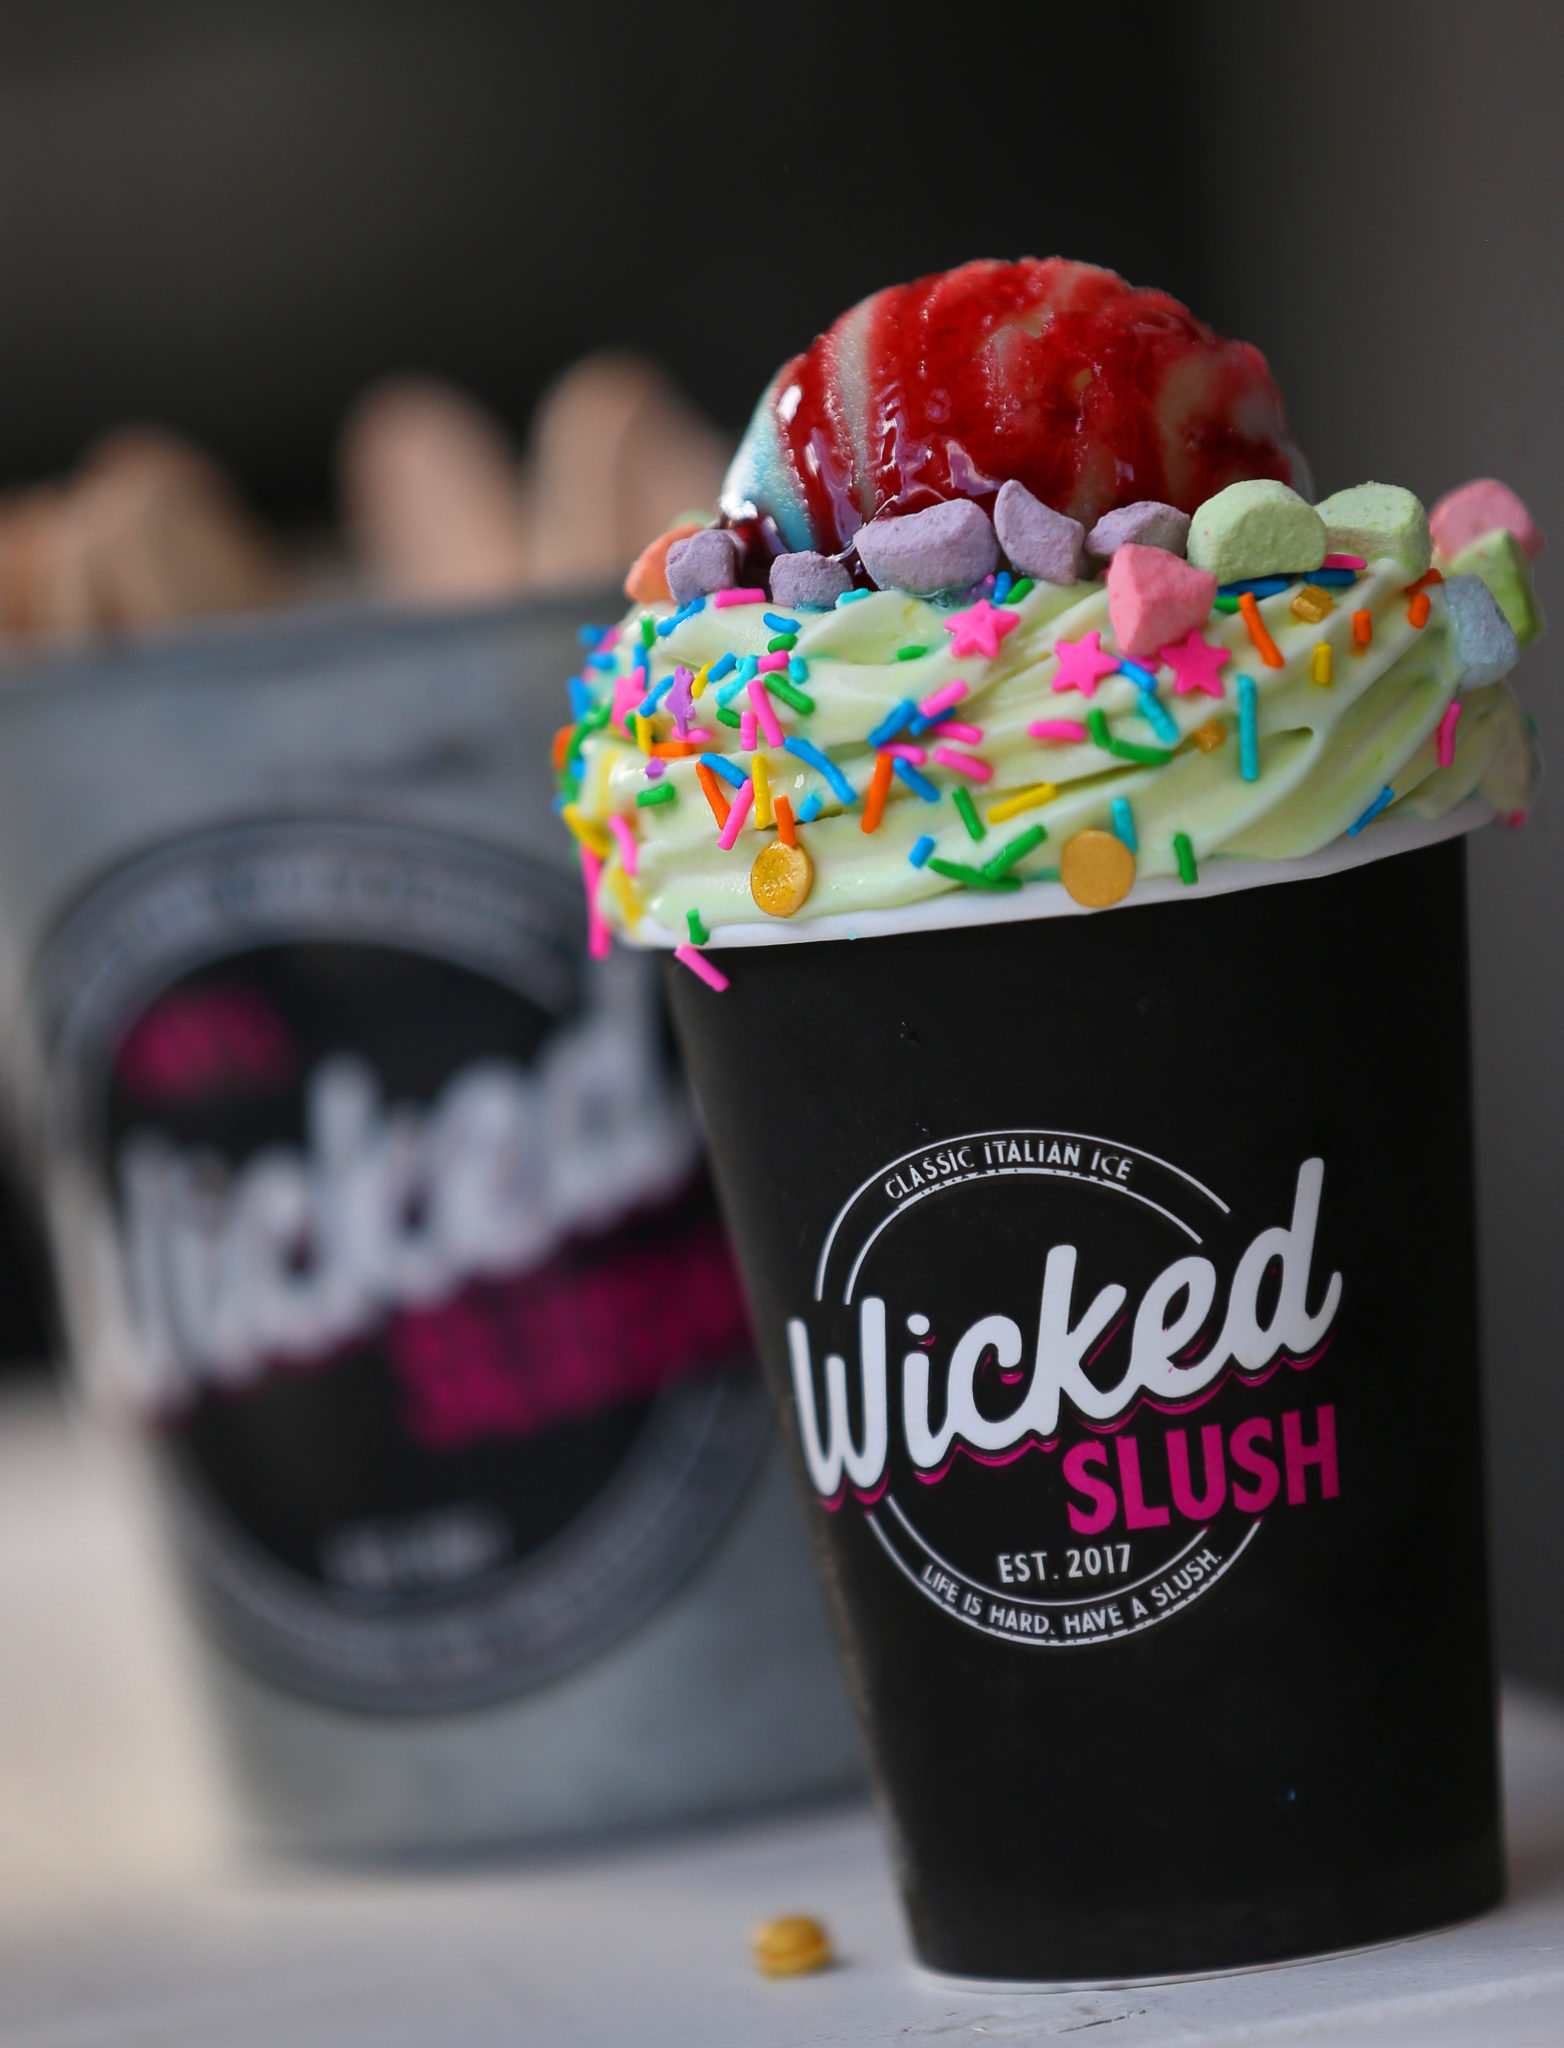 Wicked Slush serves up a slush with soft serve ice cream split in a wide variety of flavor combinations. (Christopher Chung/ The Press Democrat)